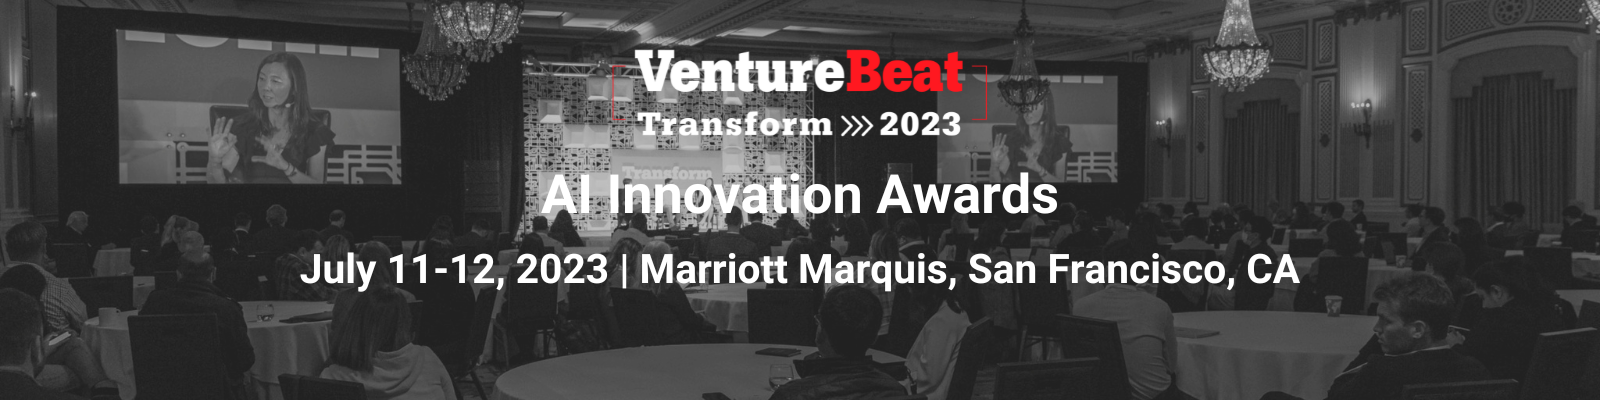 VB Transform 2023: Announcing the nominees for VentureBeat’s 5th annual AI Innovation Awards | VentureBeat